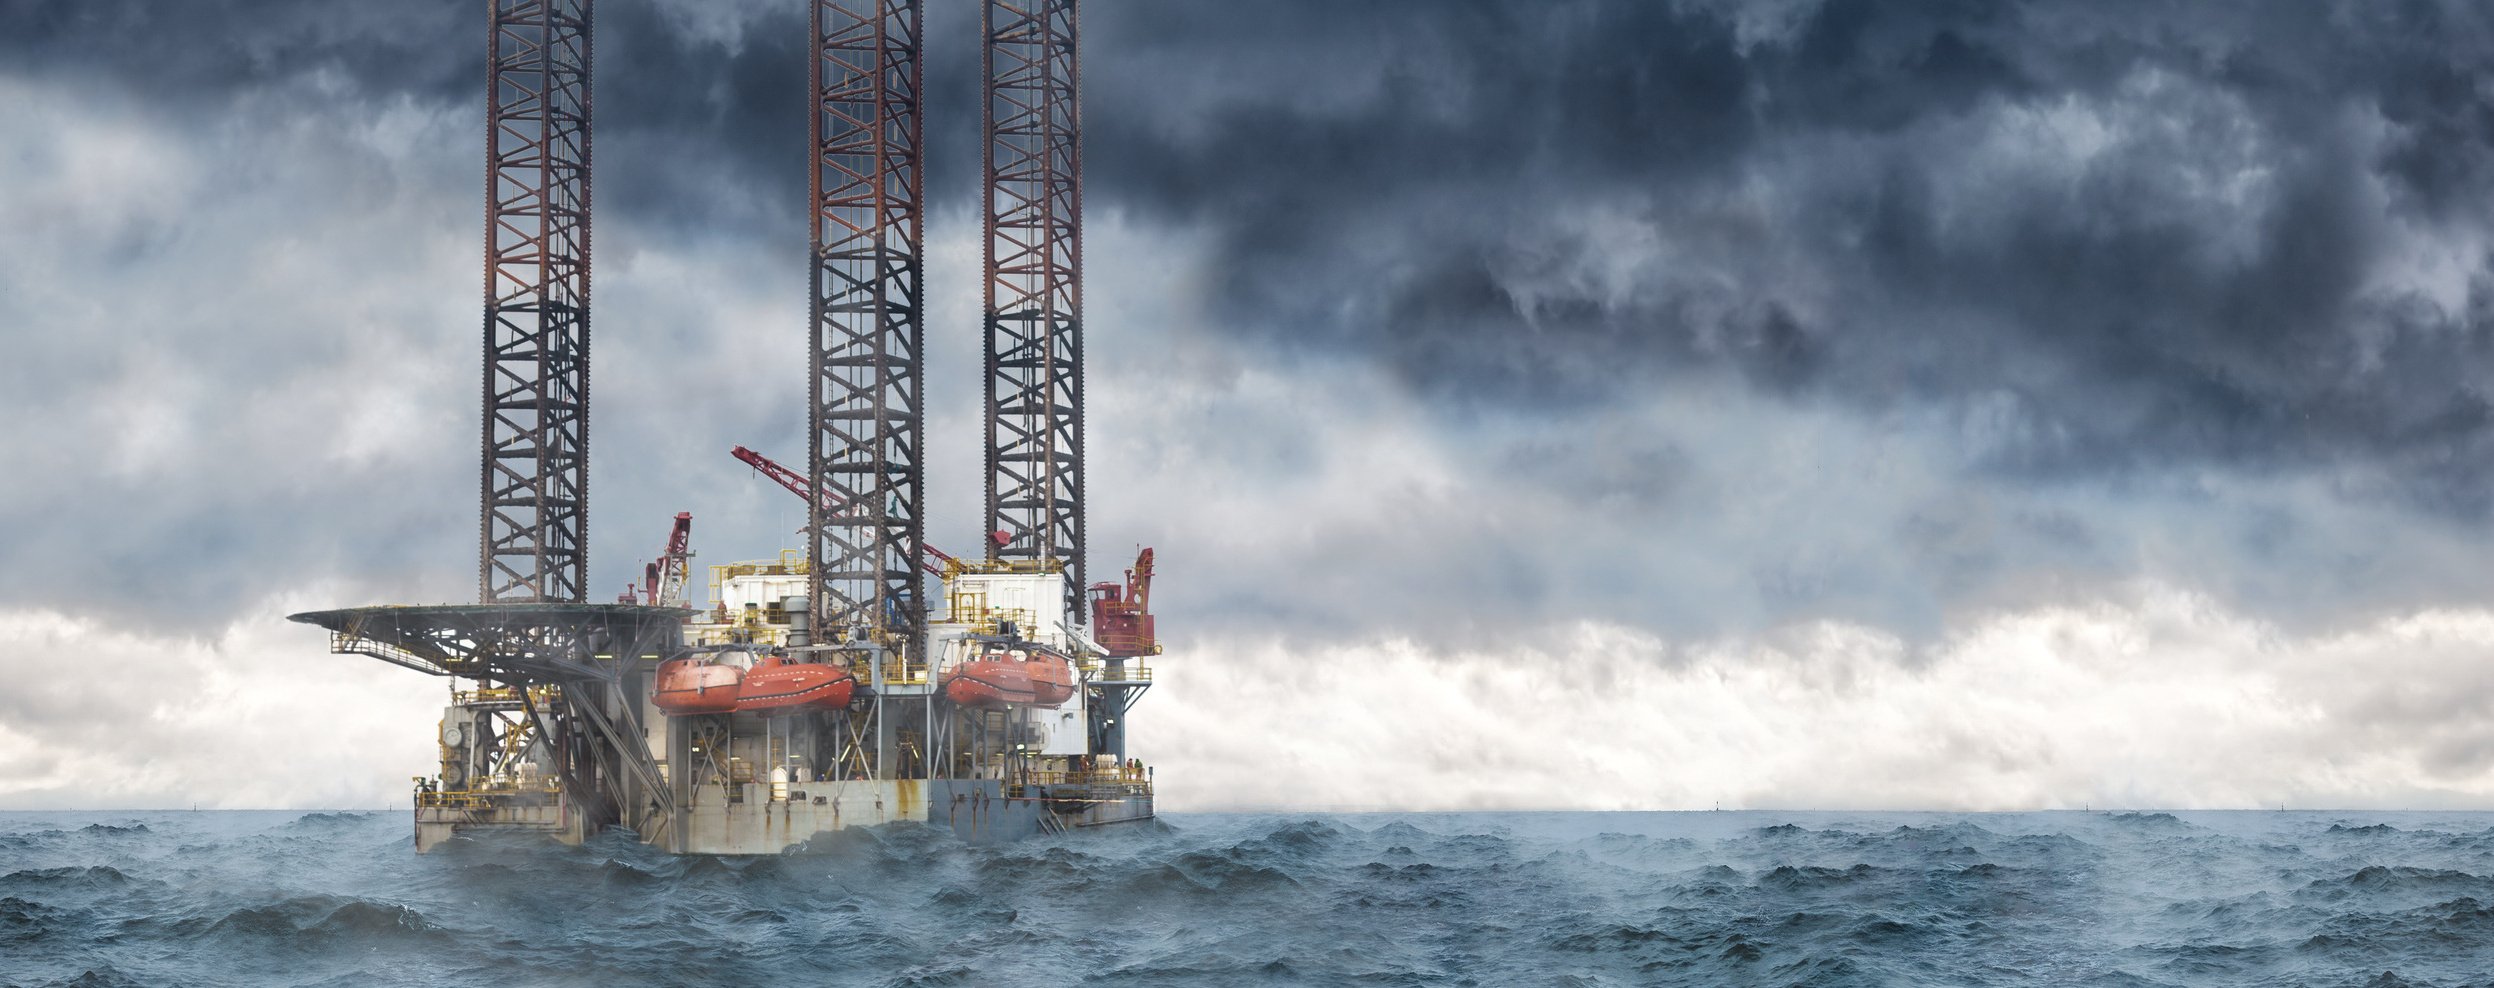 Oil Rig at sea during a storm Nightman1965 s